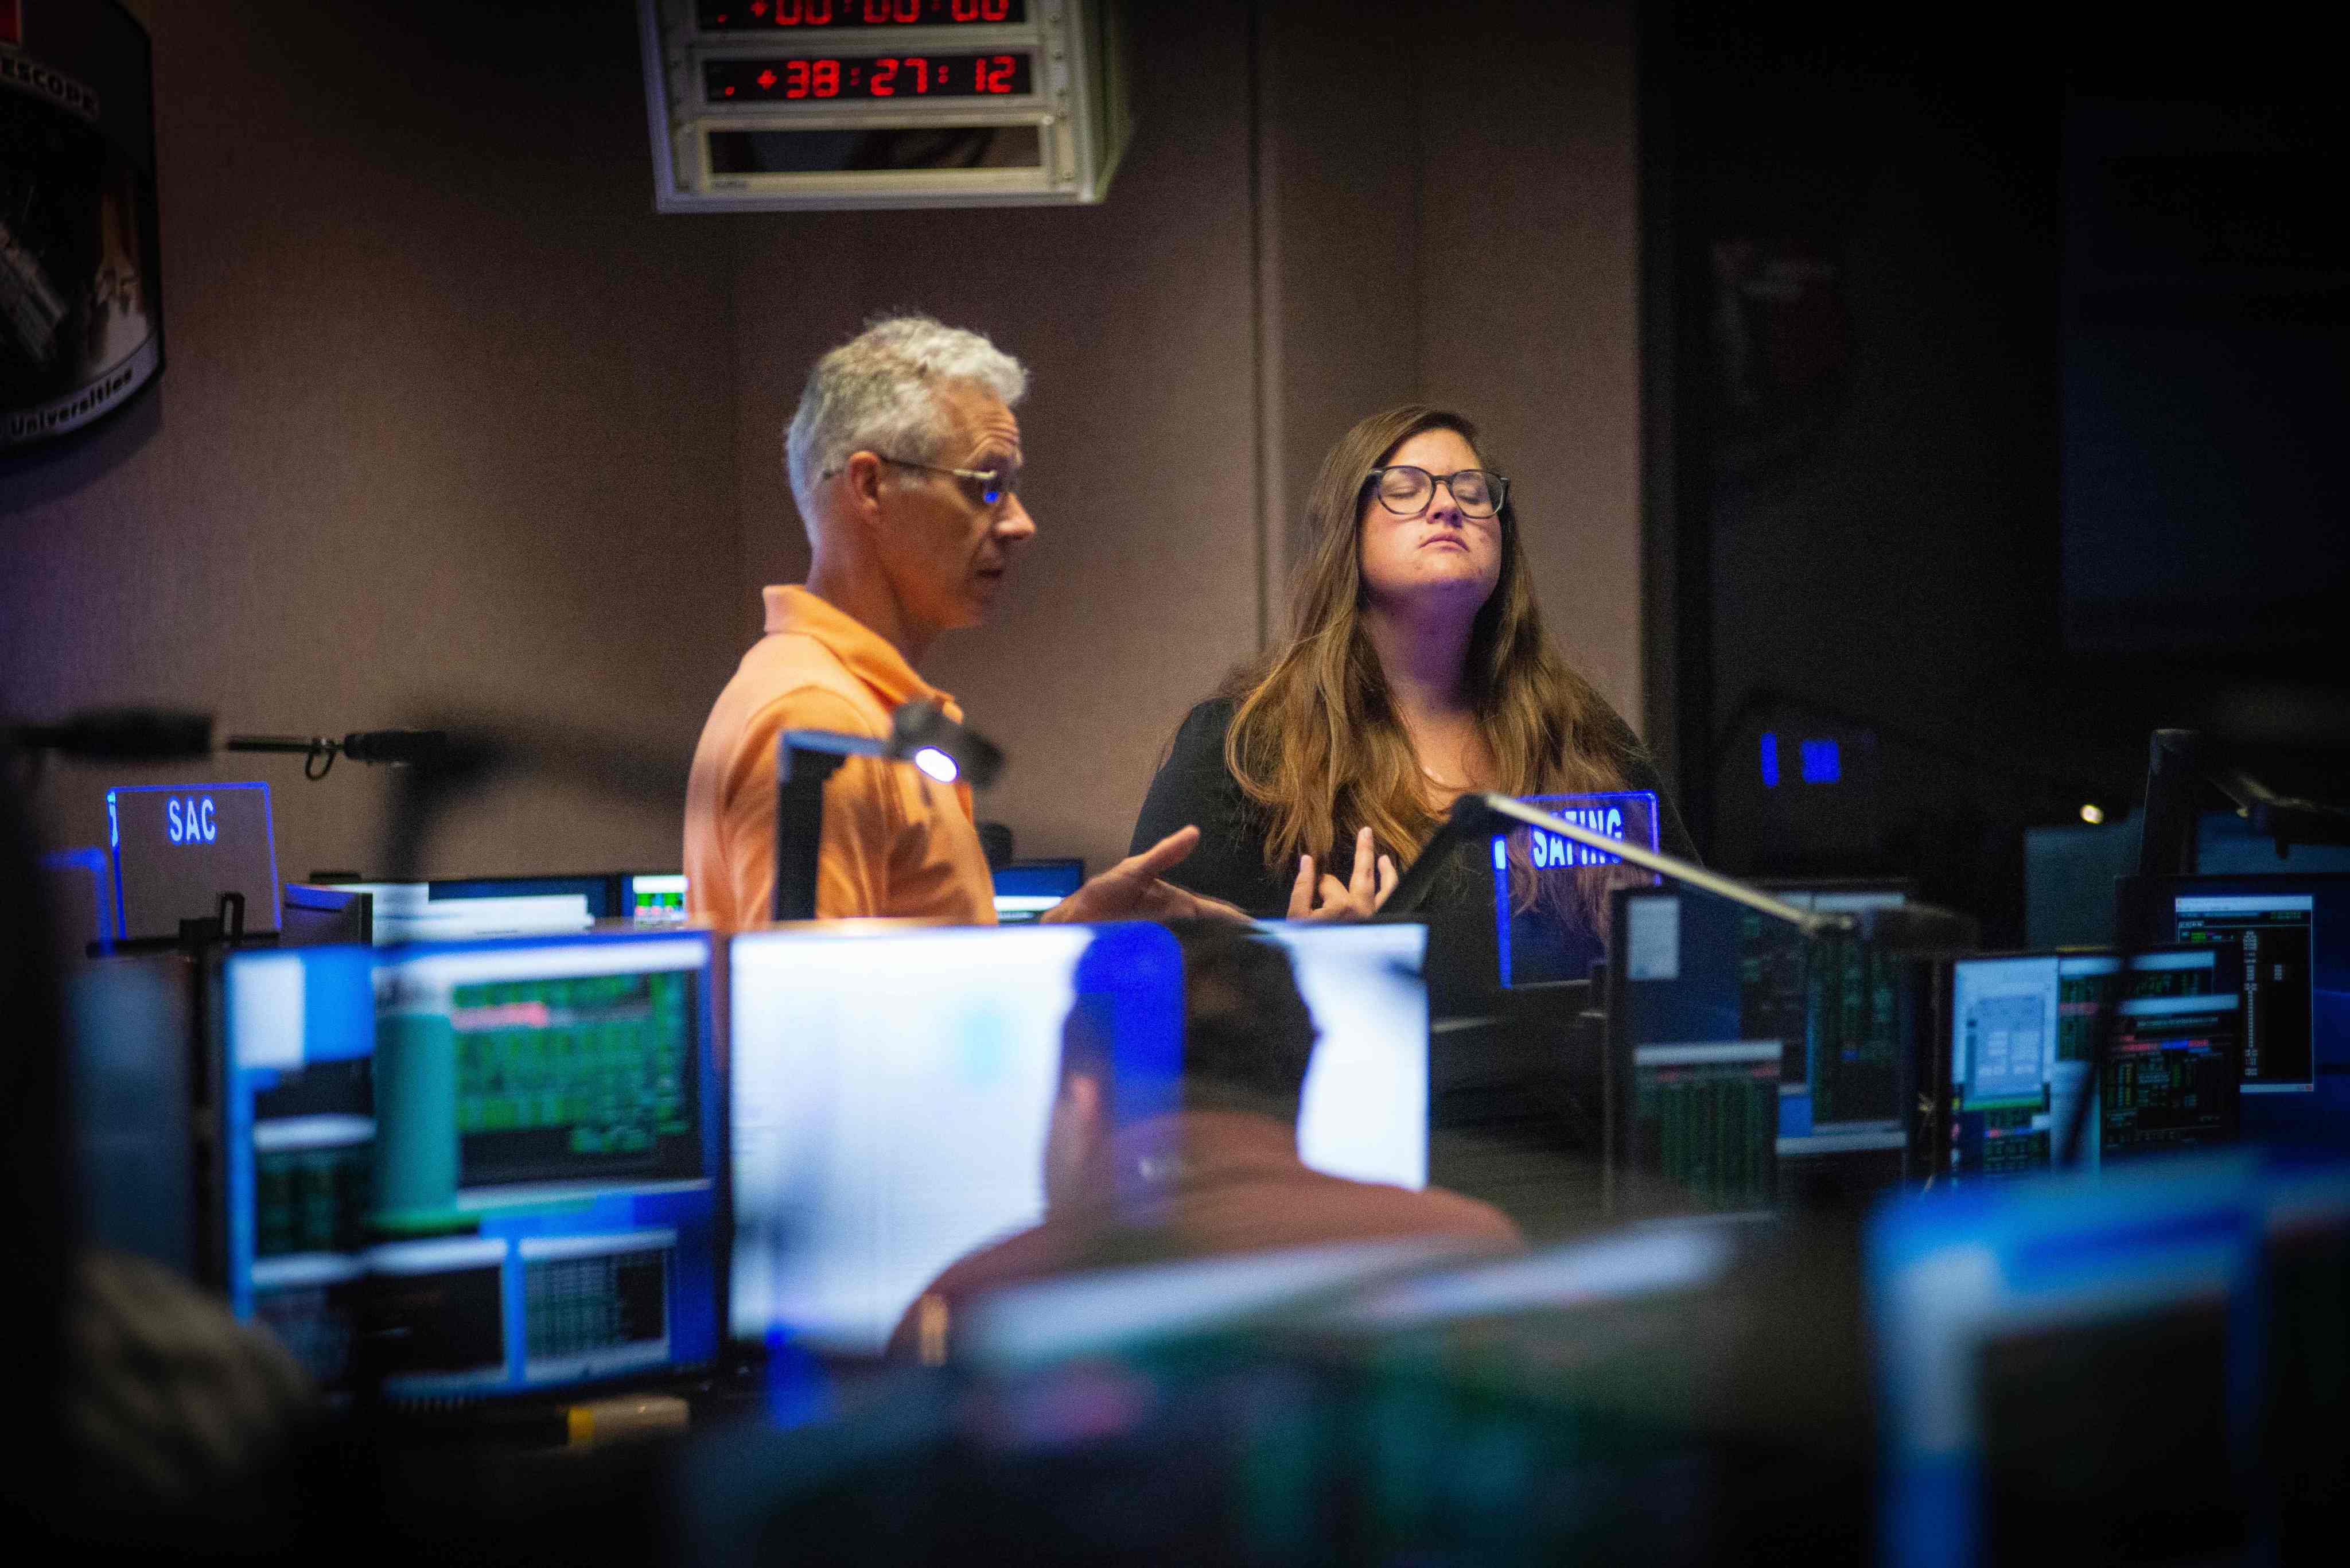 A man and a woman standing in the Hubble control center both look concerned regarding the process of switching to backup spacecraft hardware.